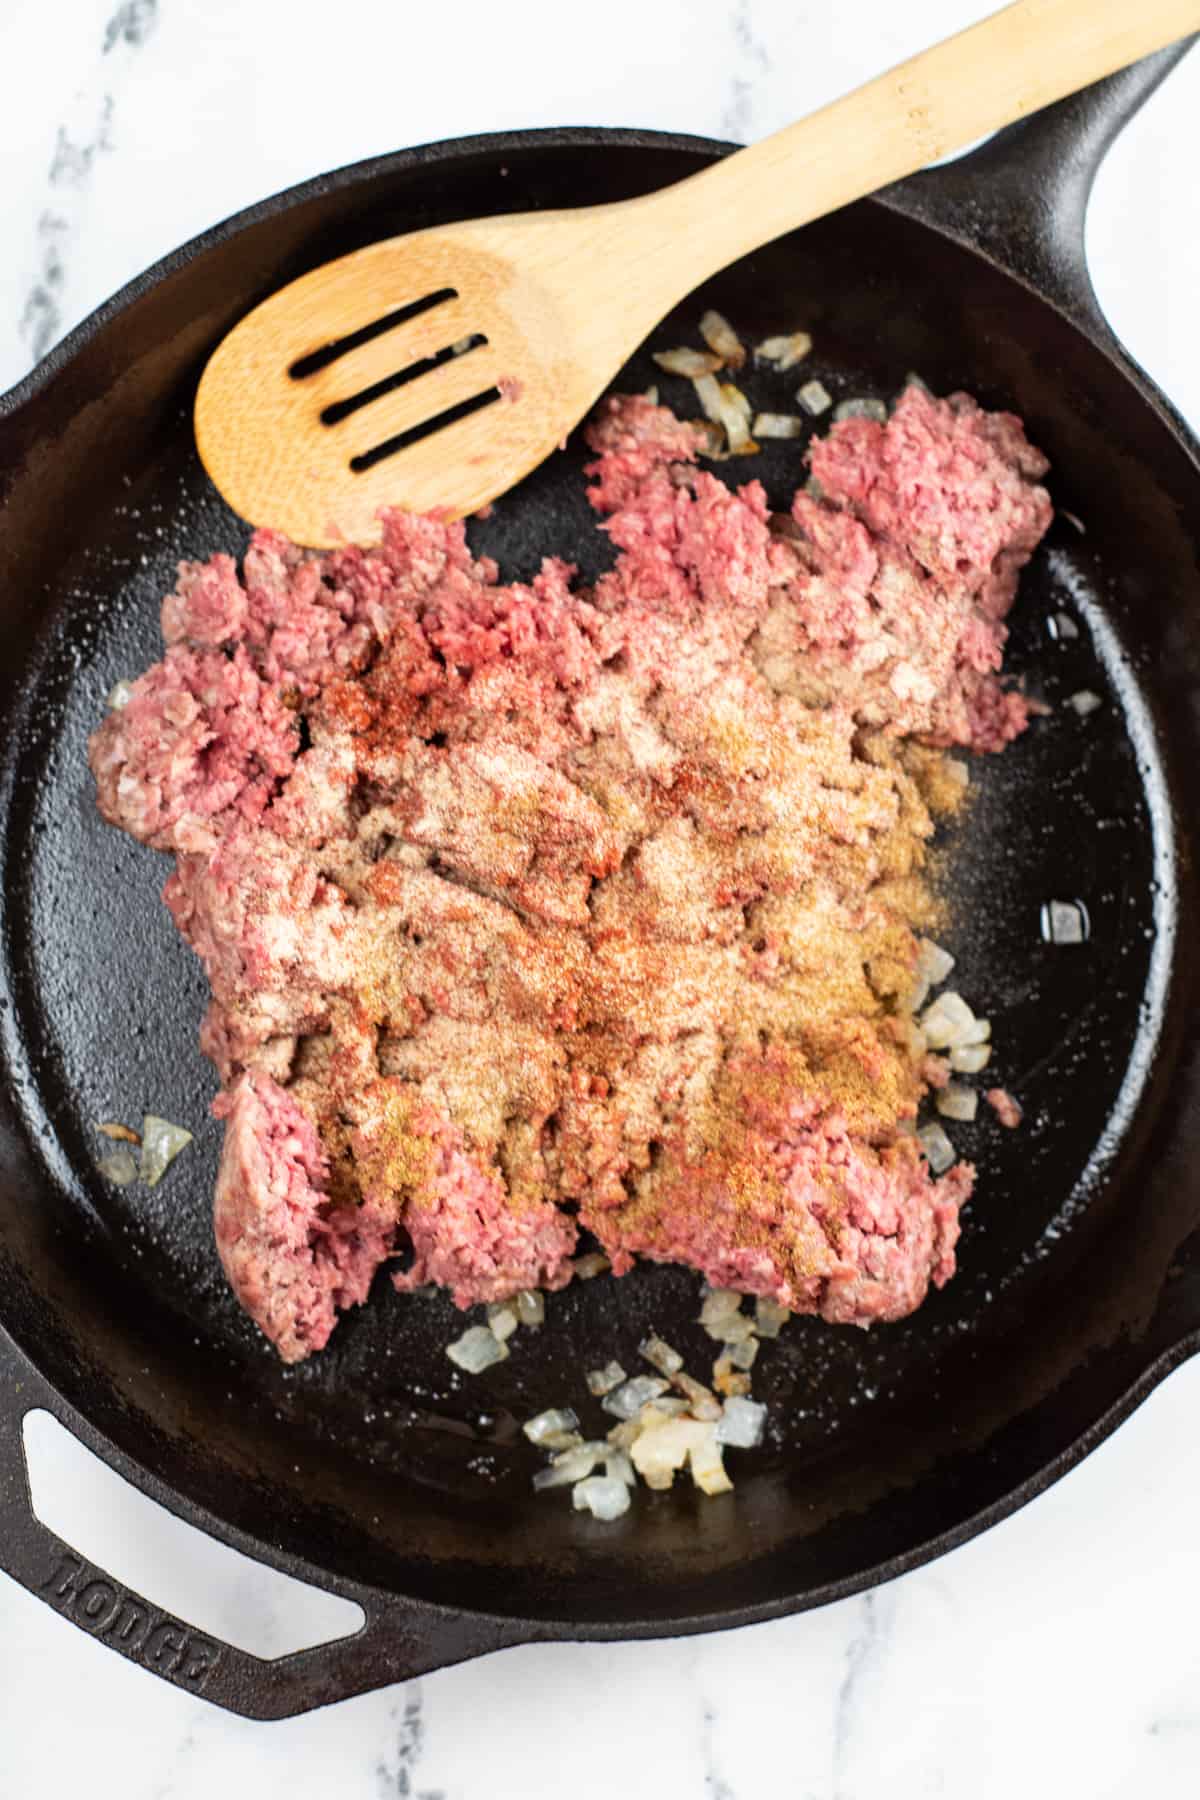 Ground beef and onions in a cast iron skillet with a wooden spoon.